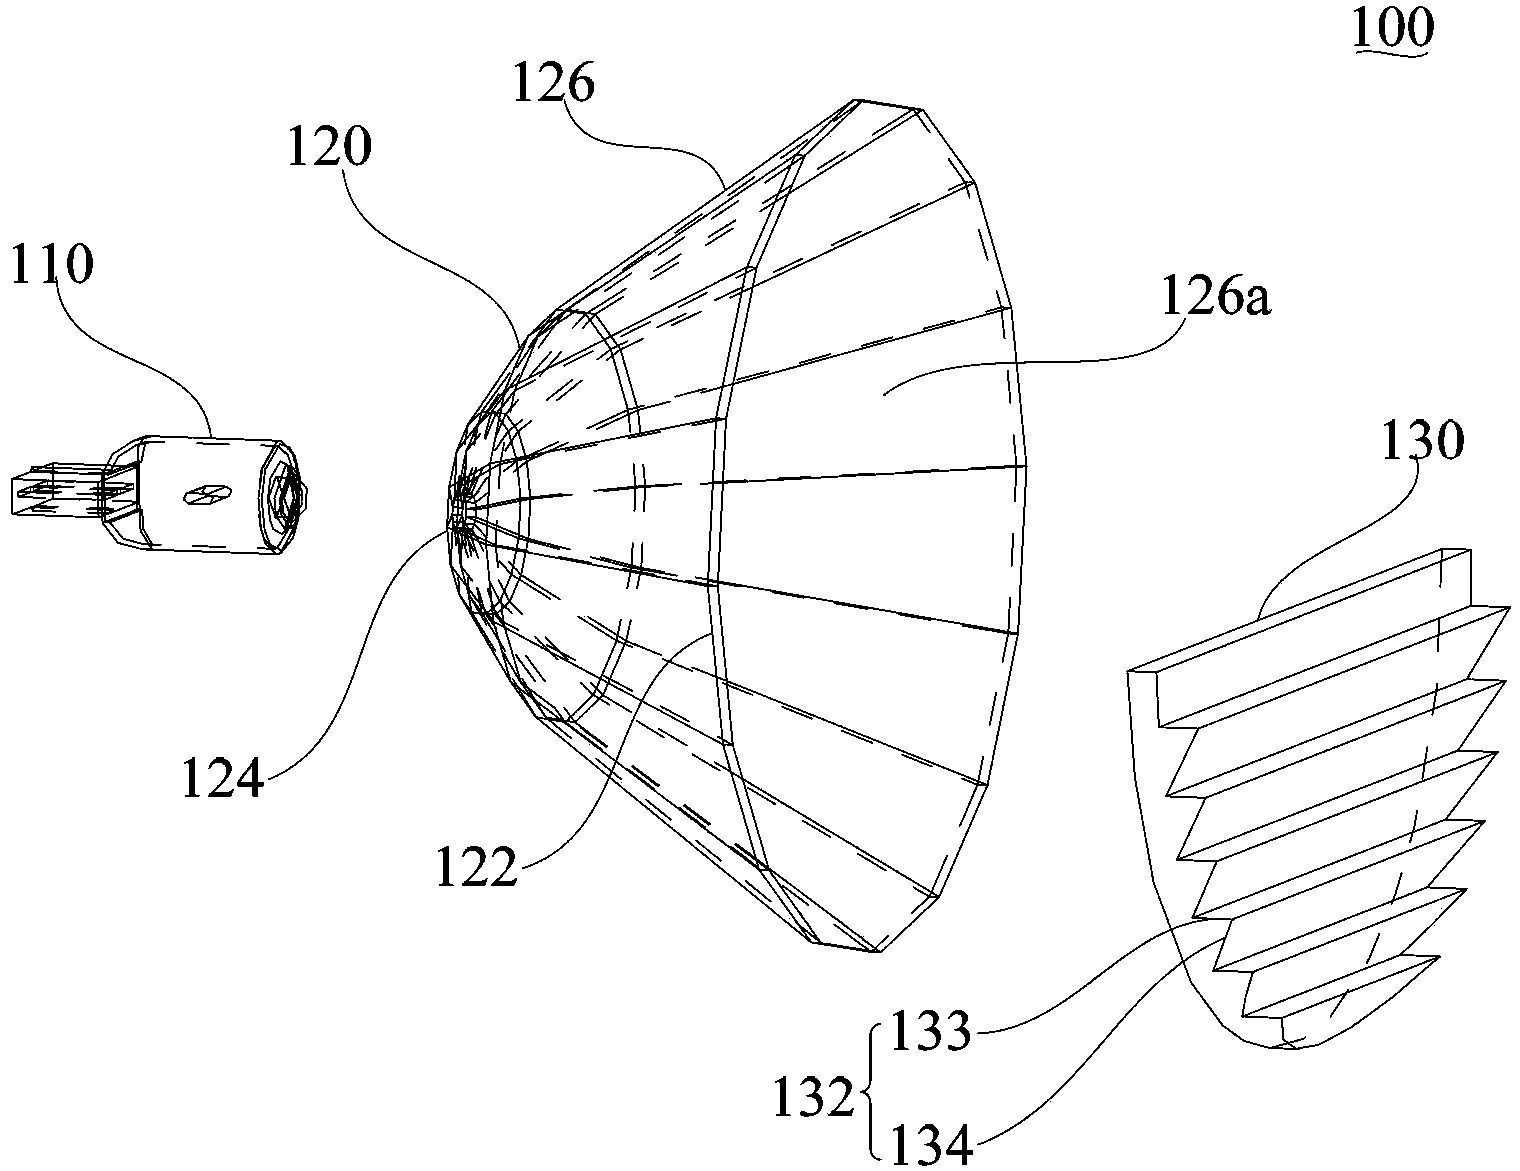 Light source structure and runway alarm light with same